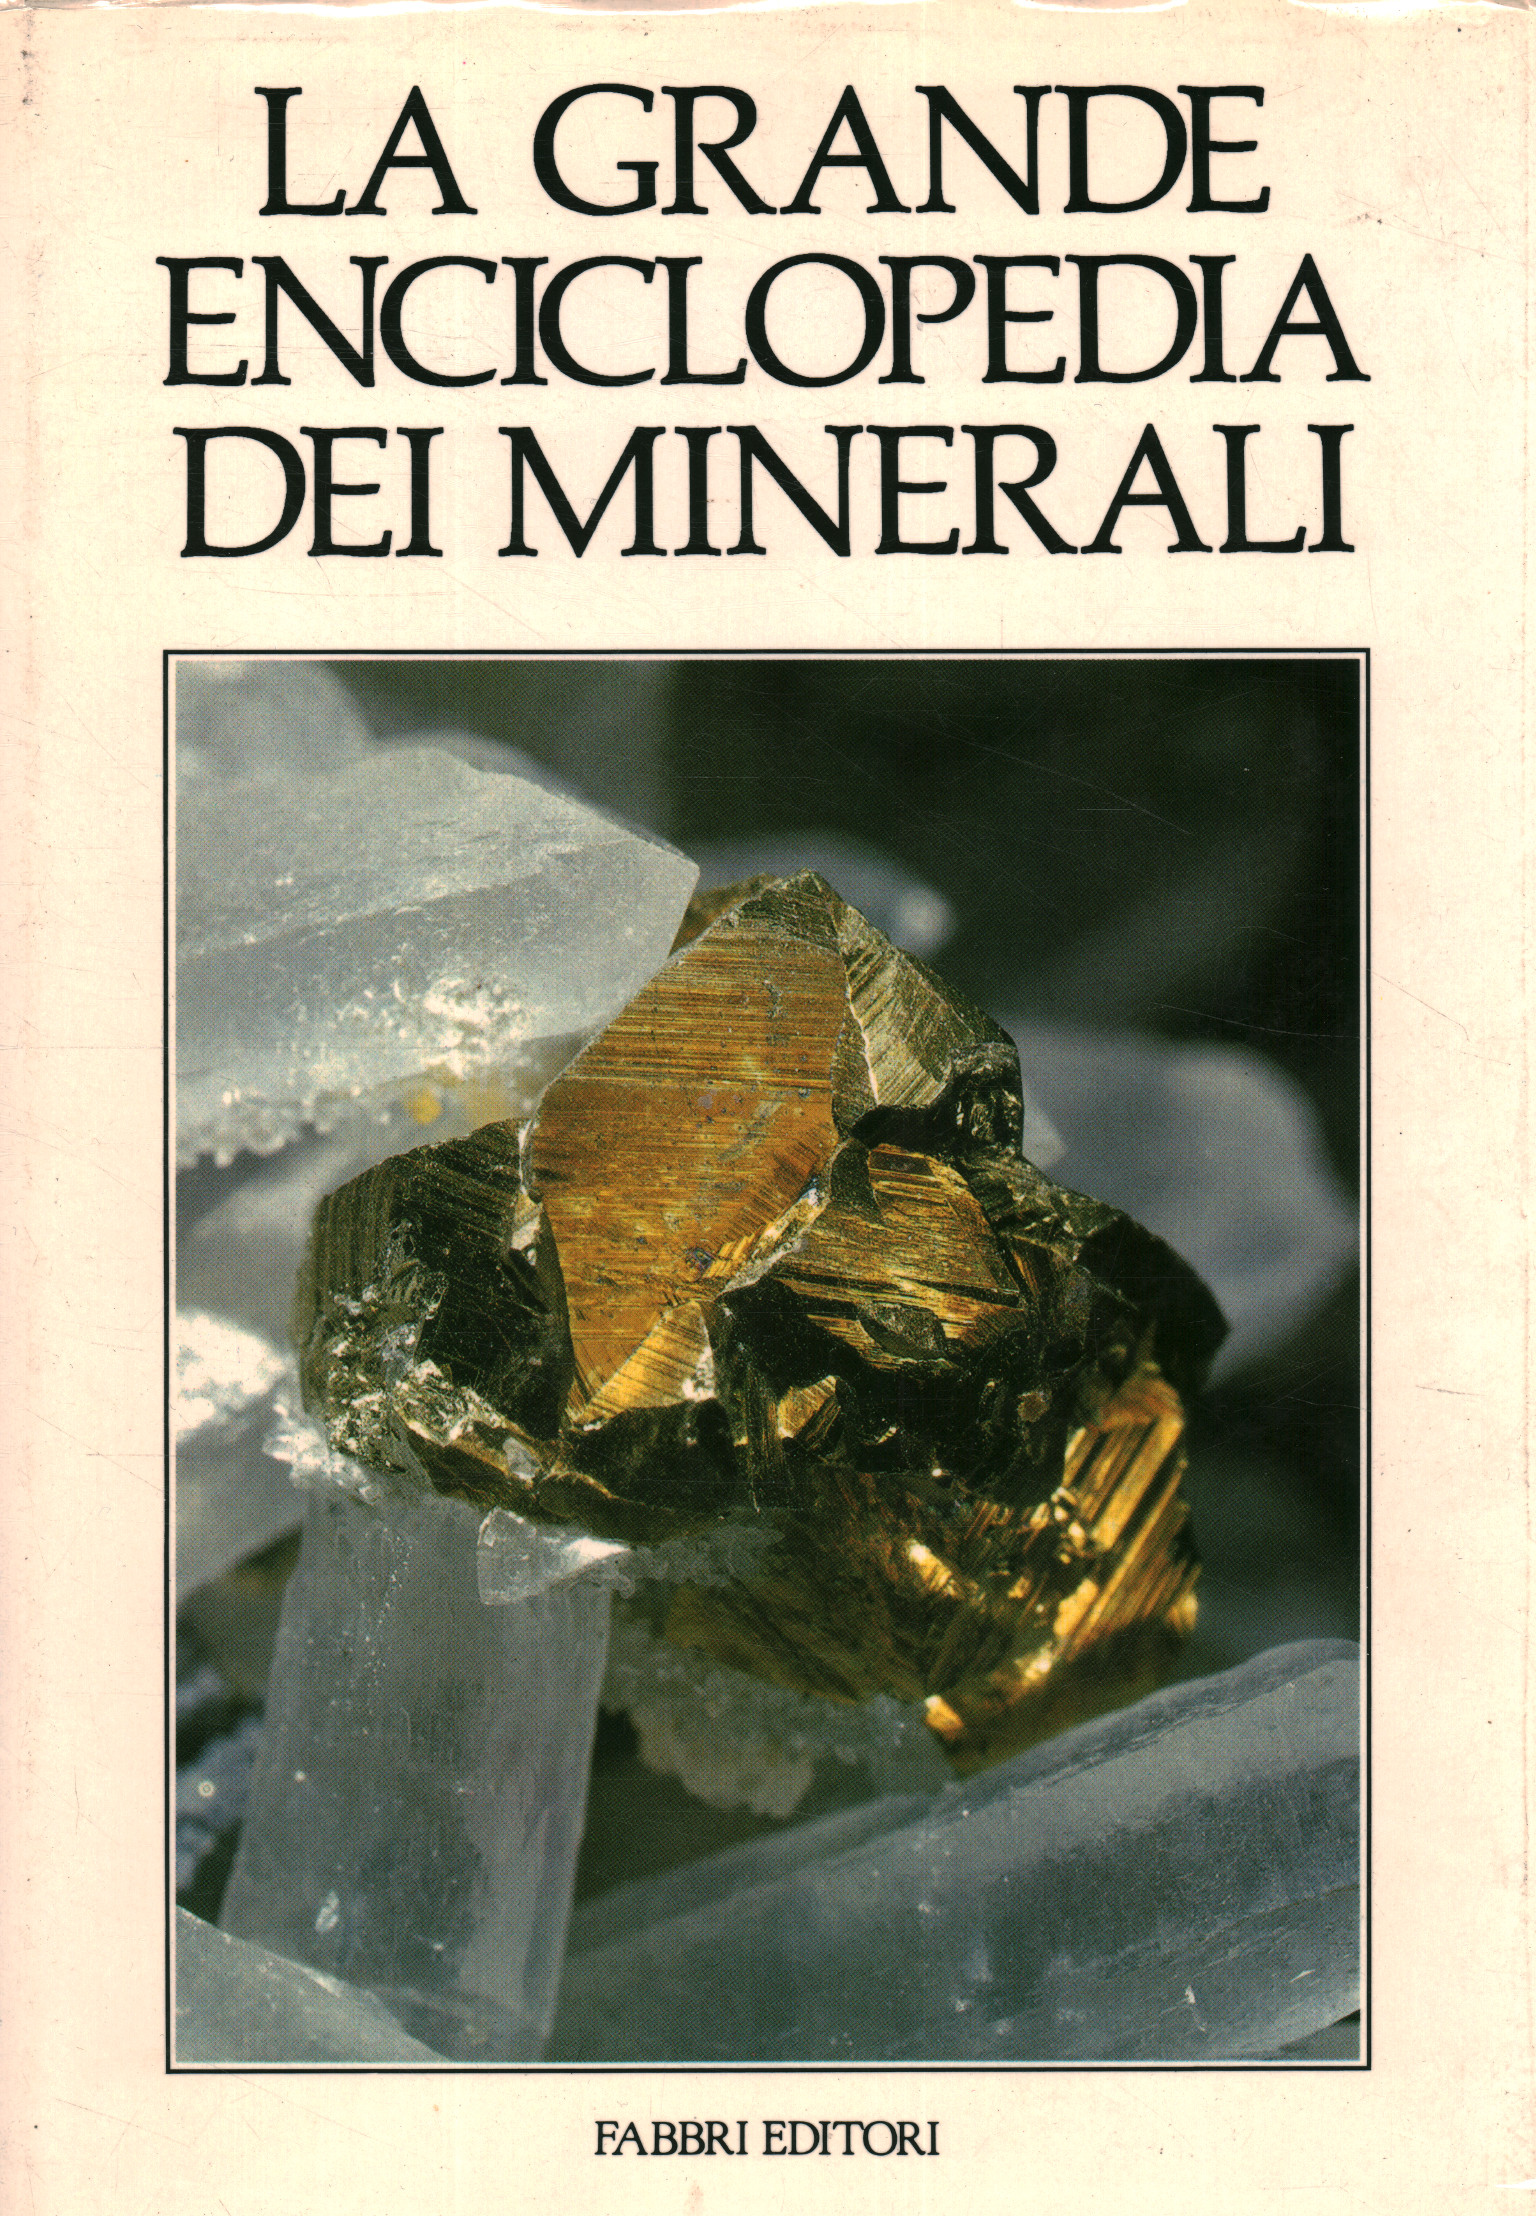 The Great Encyclopedia of Minerals